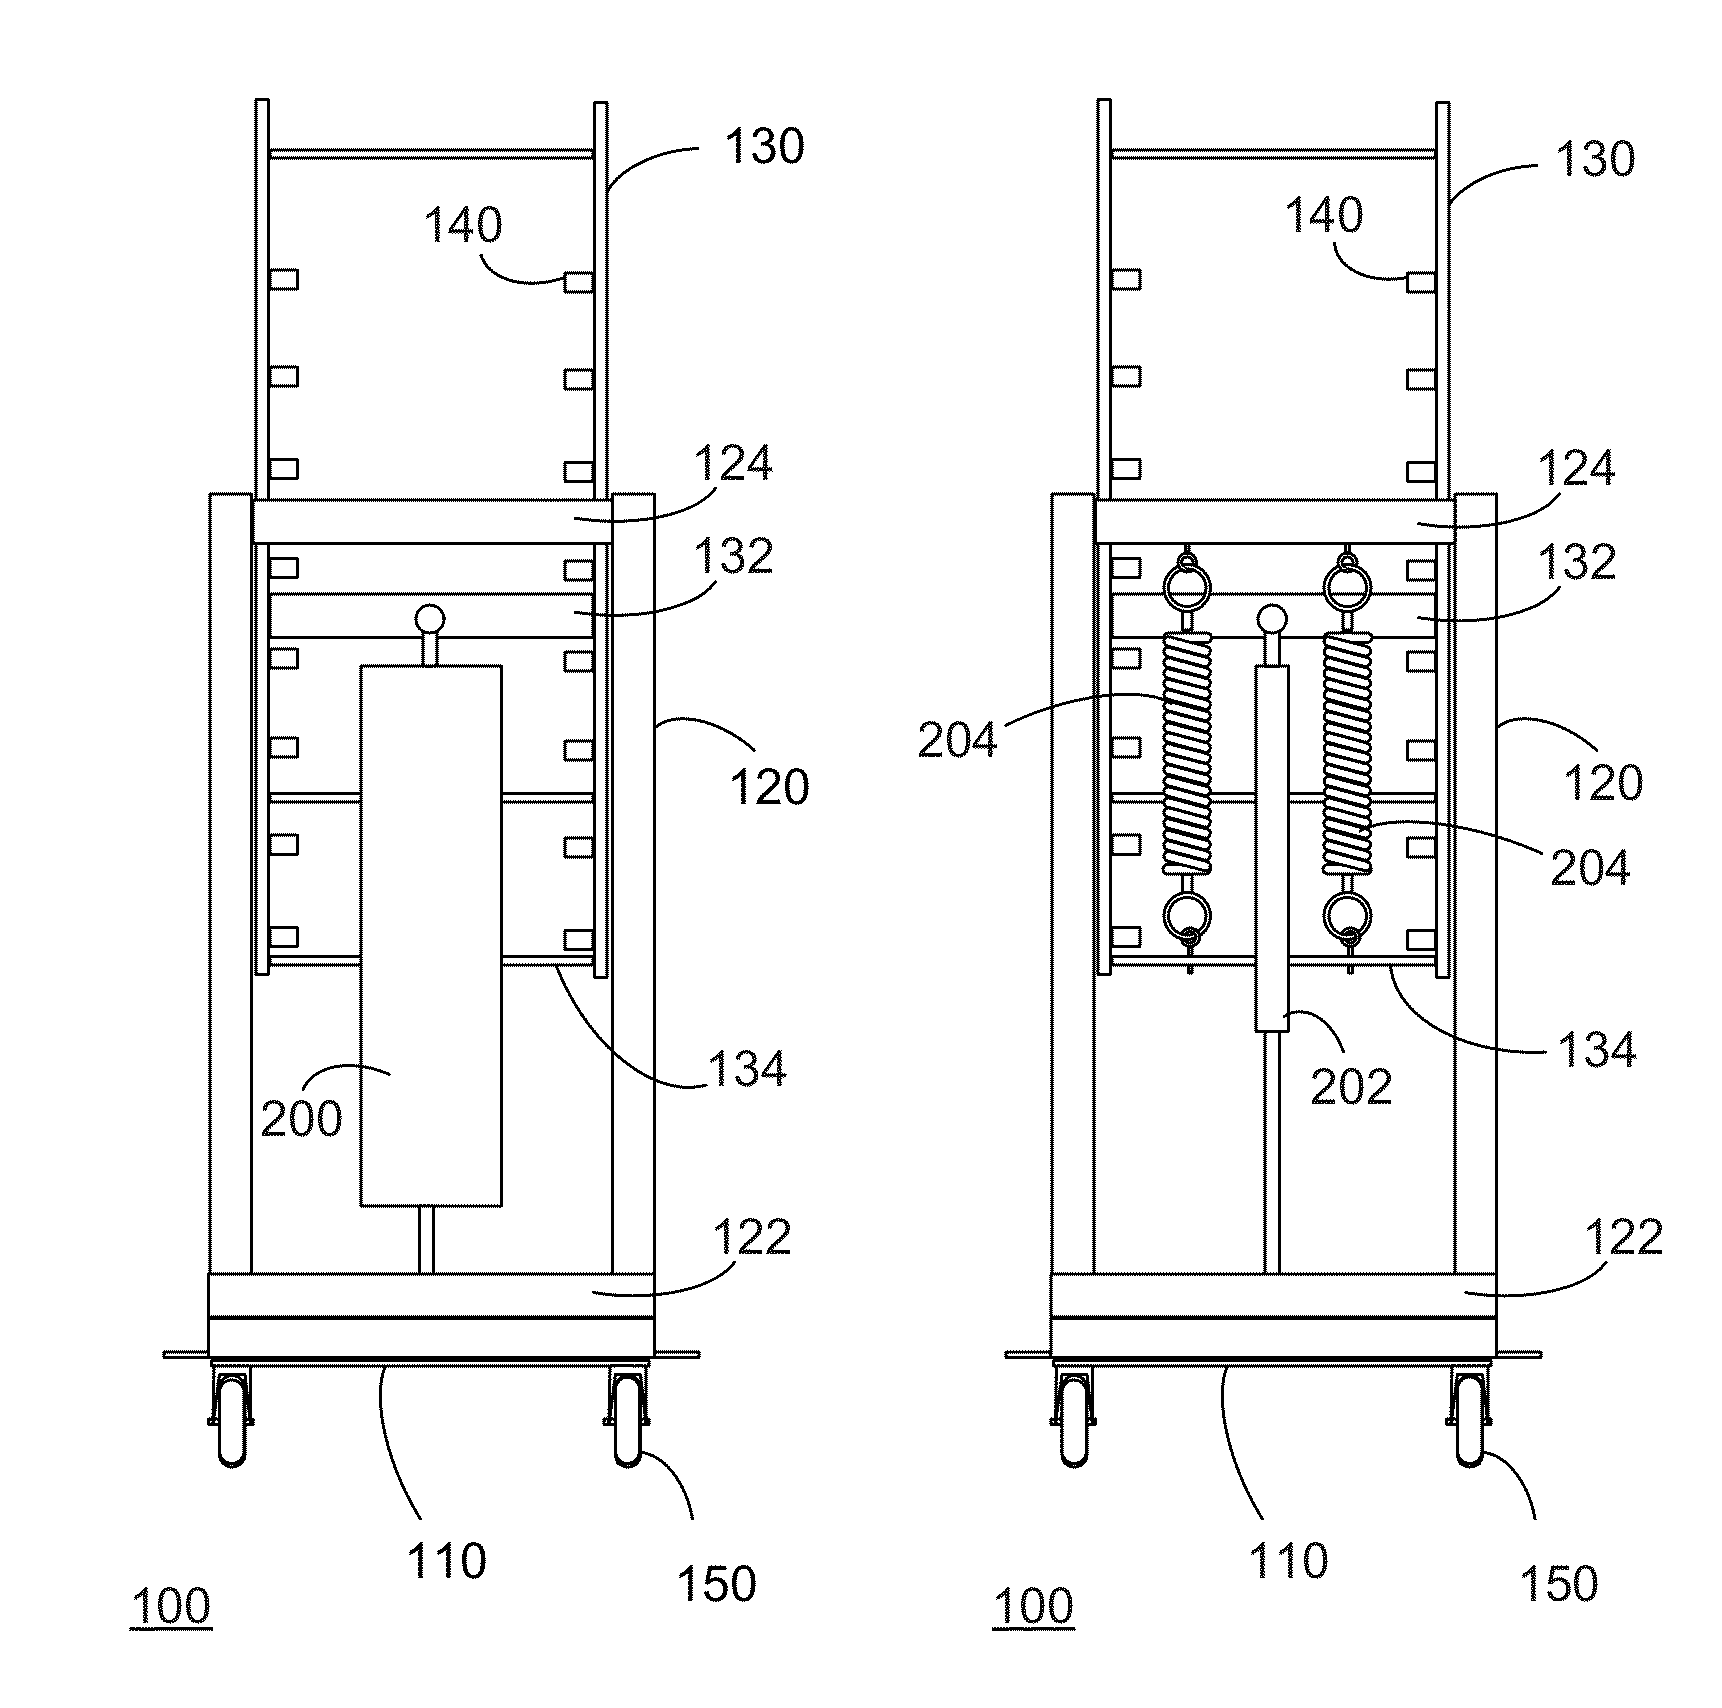 Self-elevating and self-lowering assembly cart for transporting a household appliance assembly component